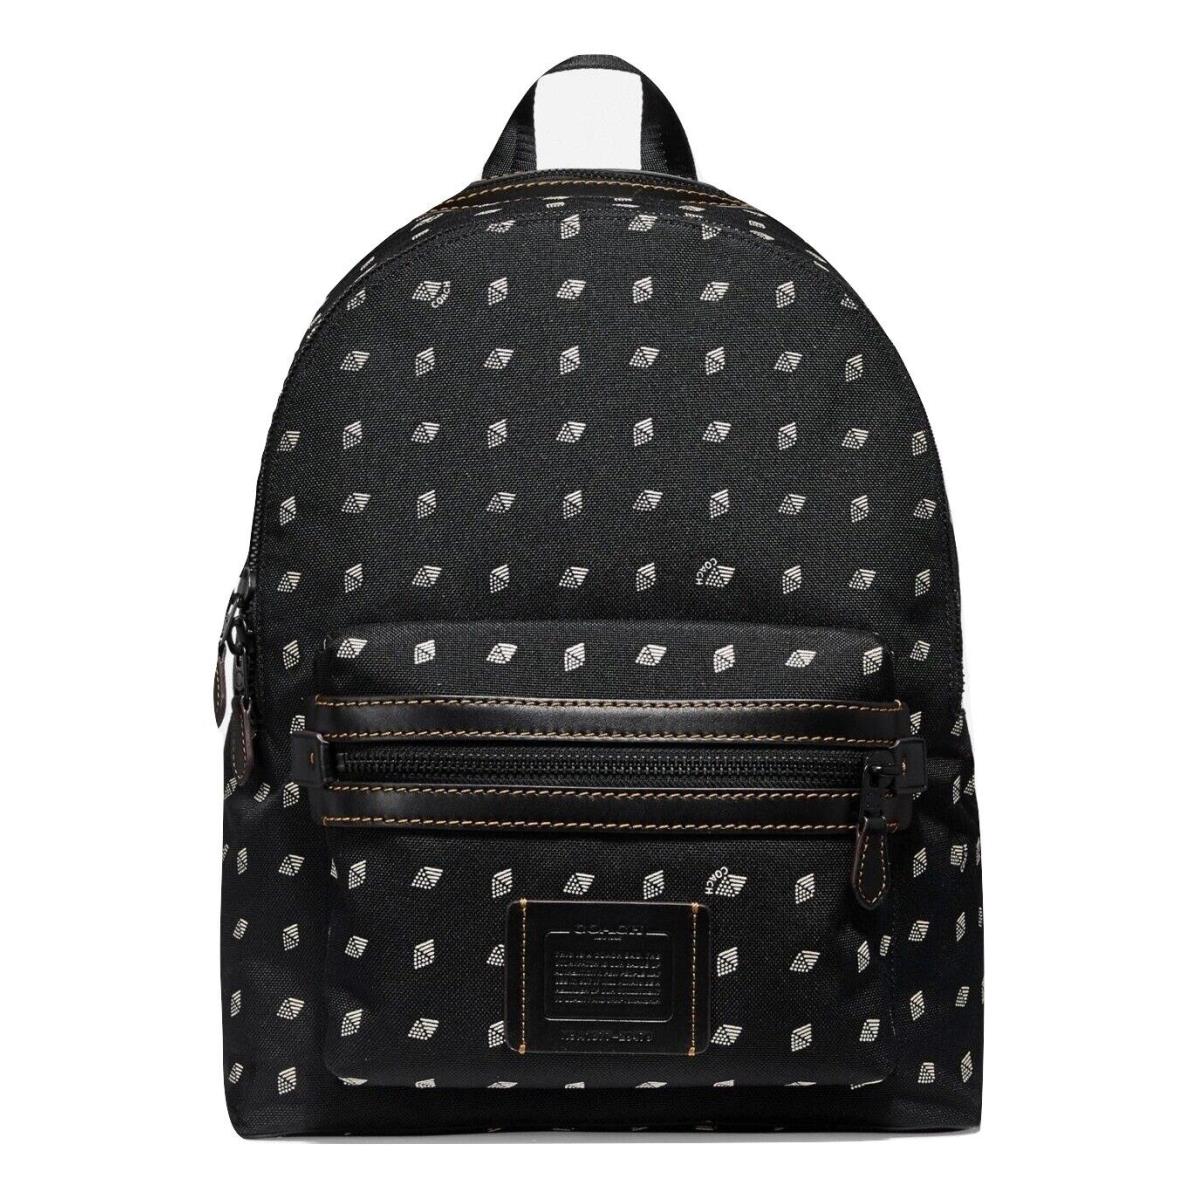 Coach F29479 Academy Backpack with Dot Diamond Print Msrp: